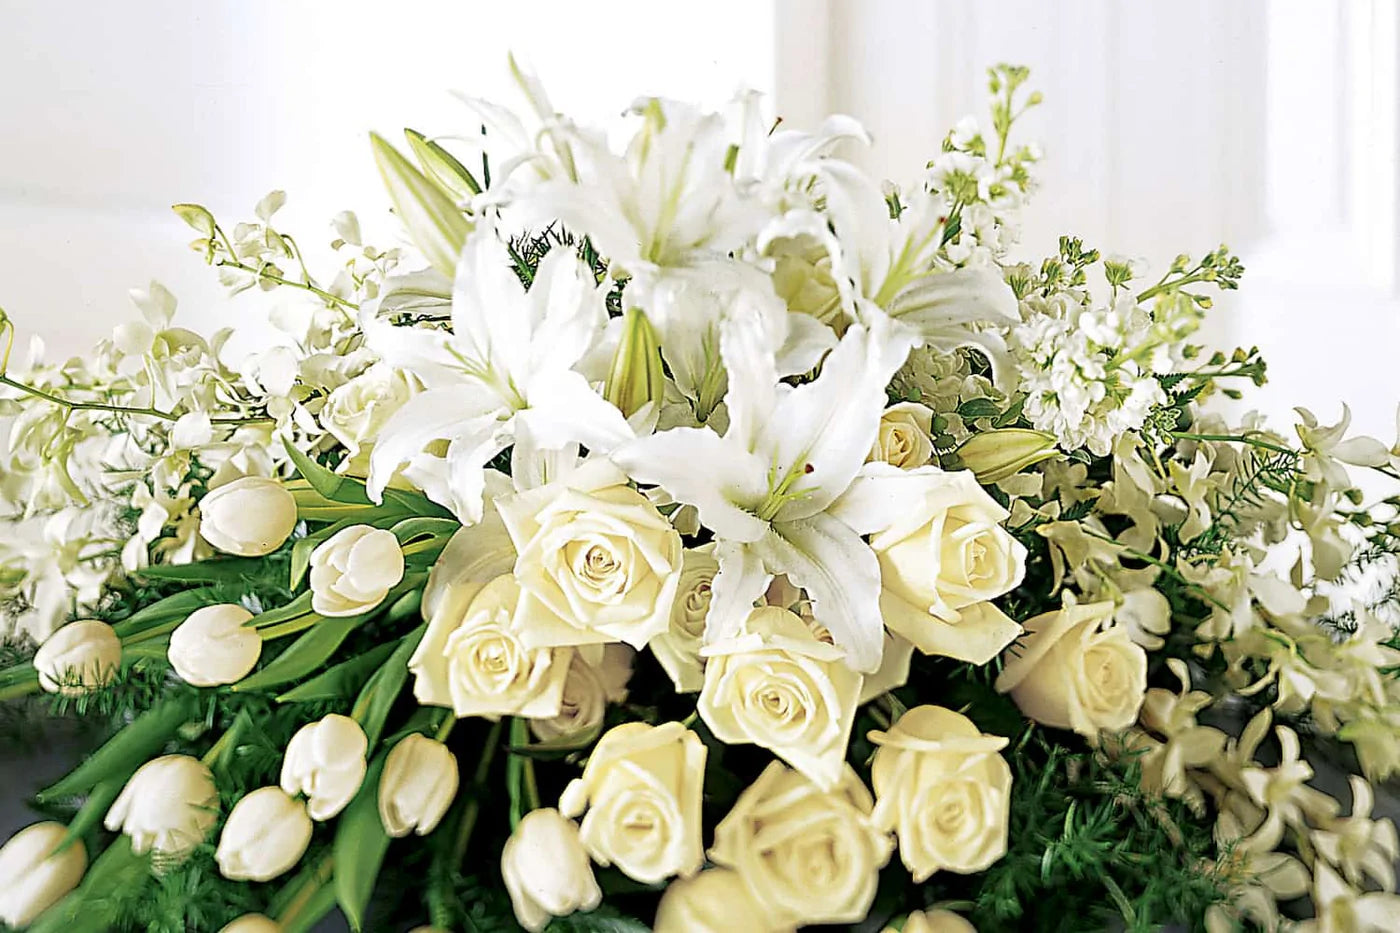 How to Order Sympathy and Funeral Flowers in Melbourne